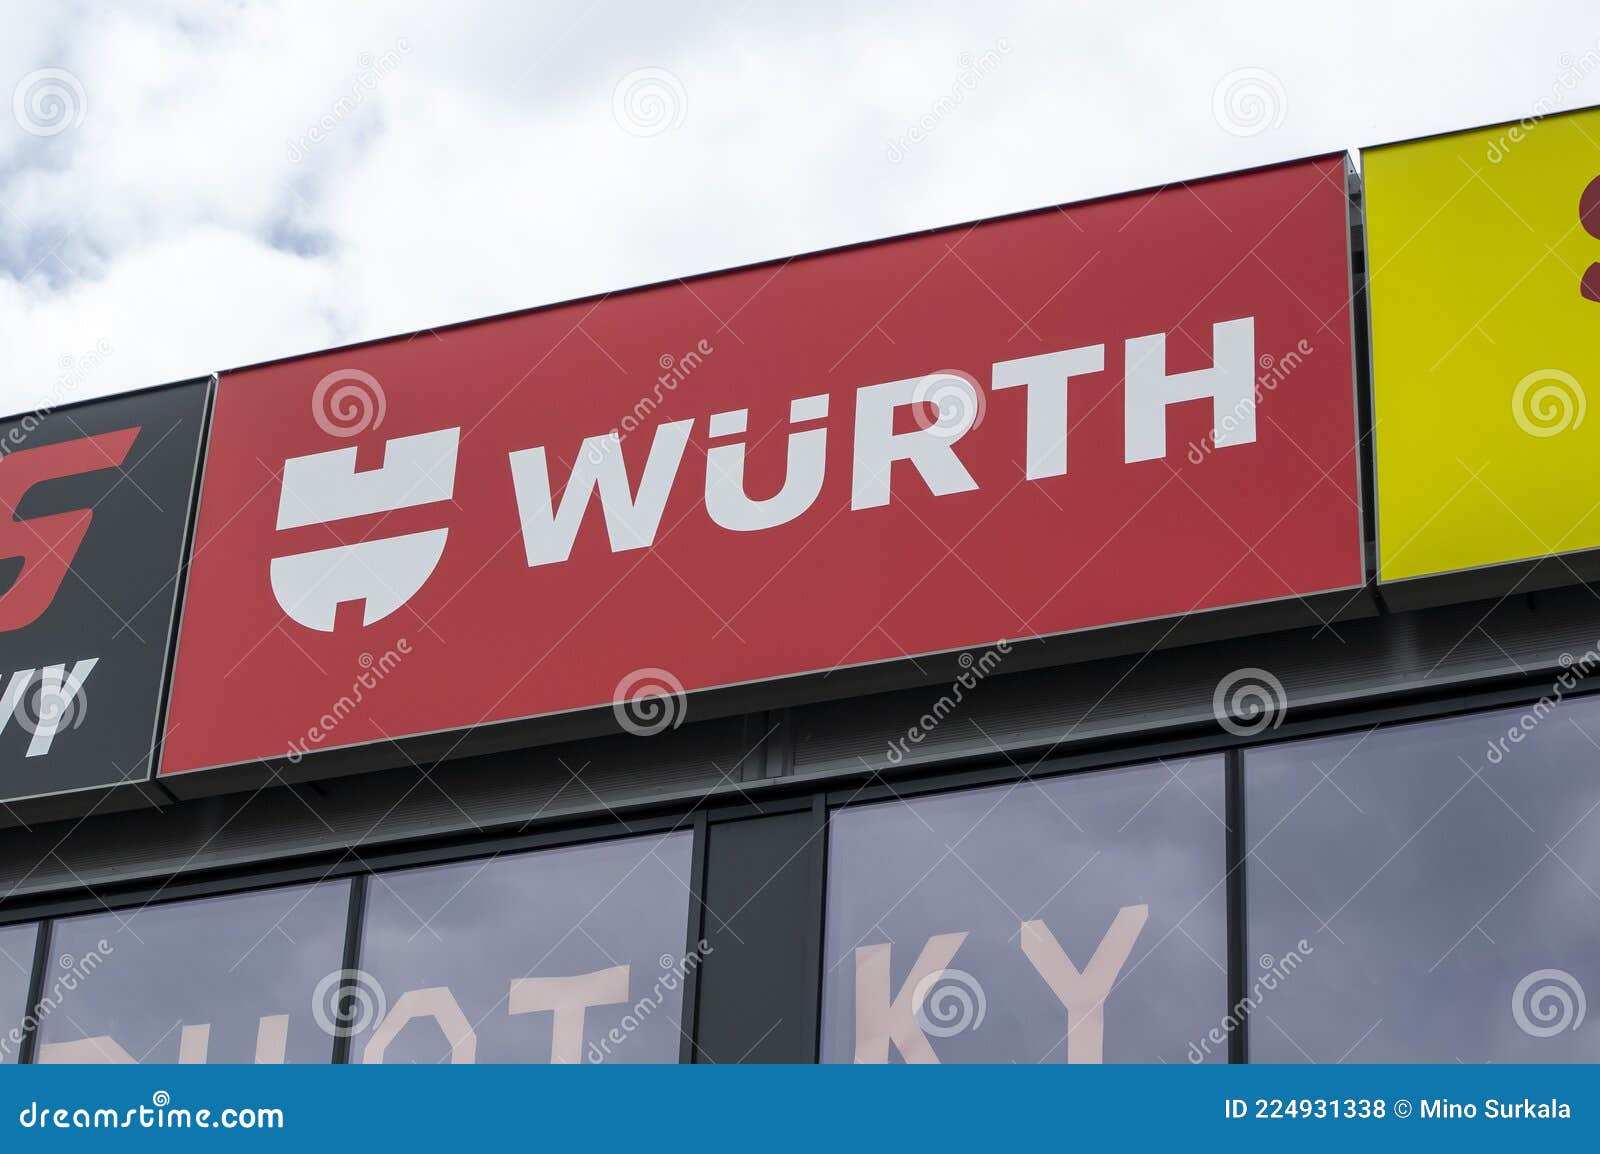 The Banner of Wurth Company Which Sells Various Industrial Products ...